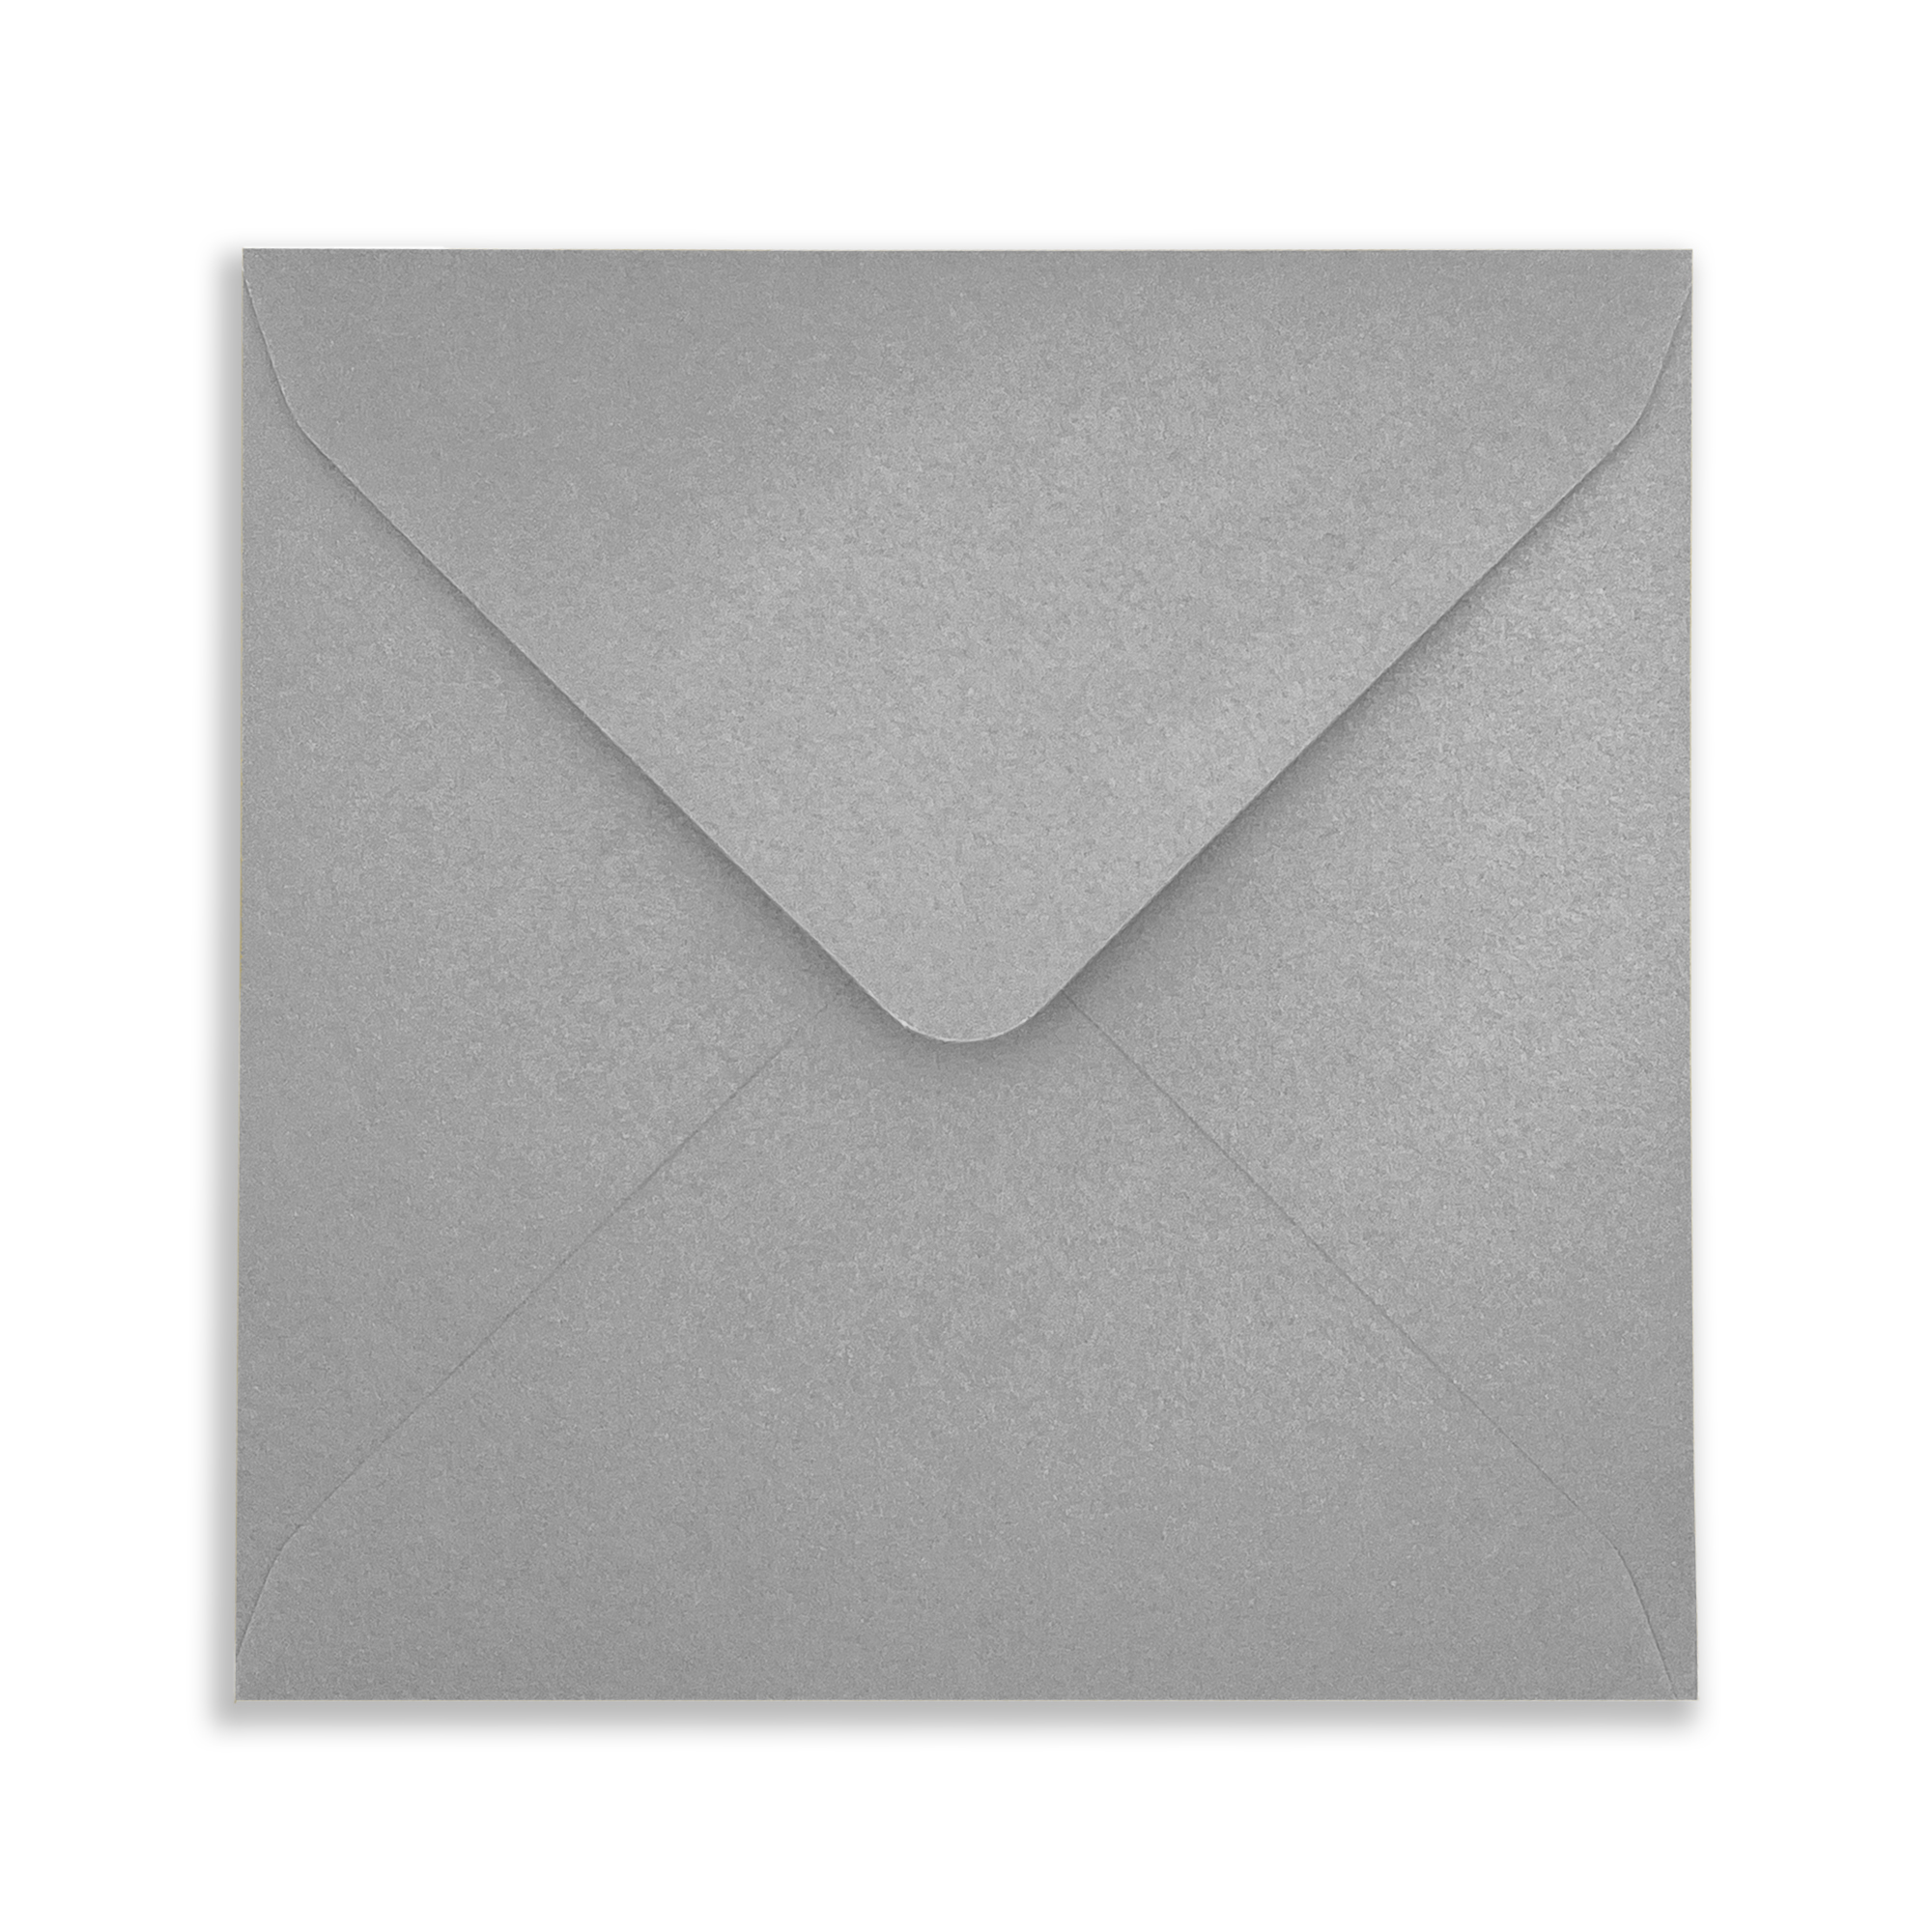 130mm_Square_empire_silver_Envelope_Front